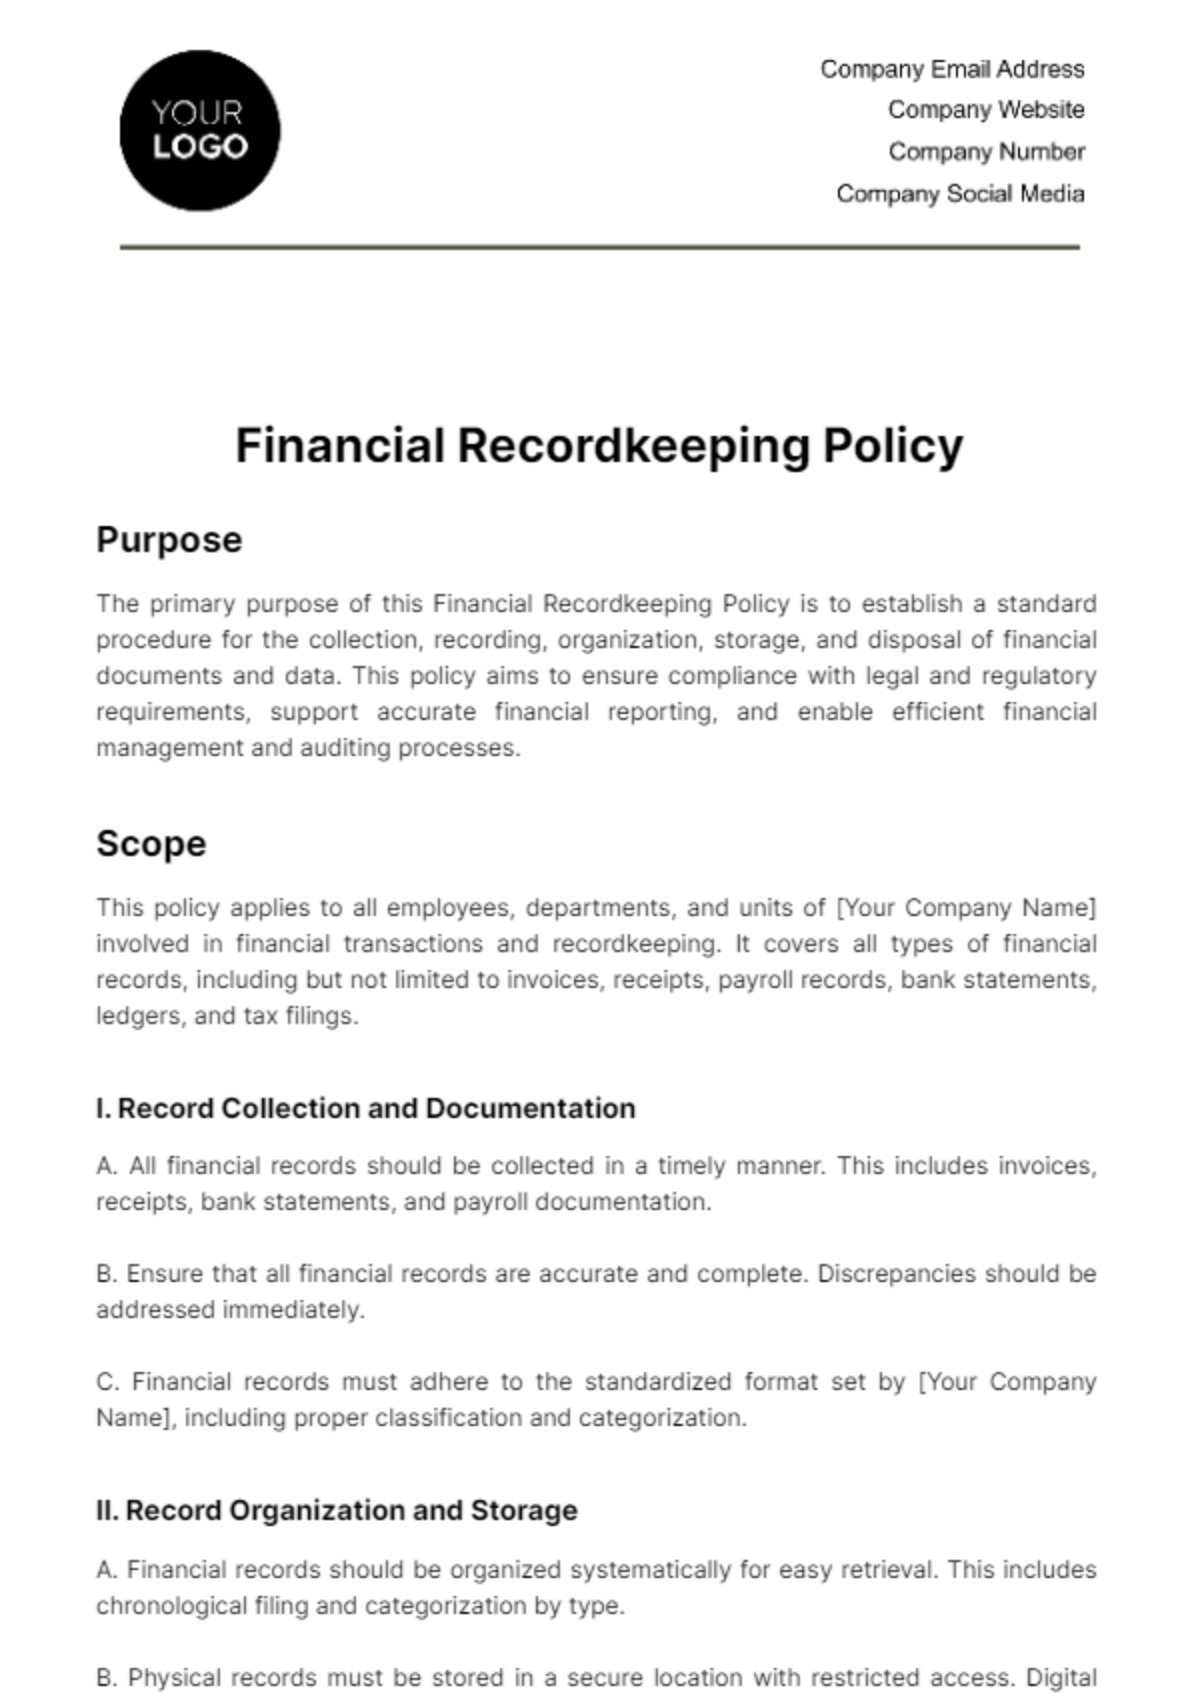 Free Financial Recordkeeping Policy Template